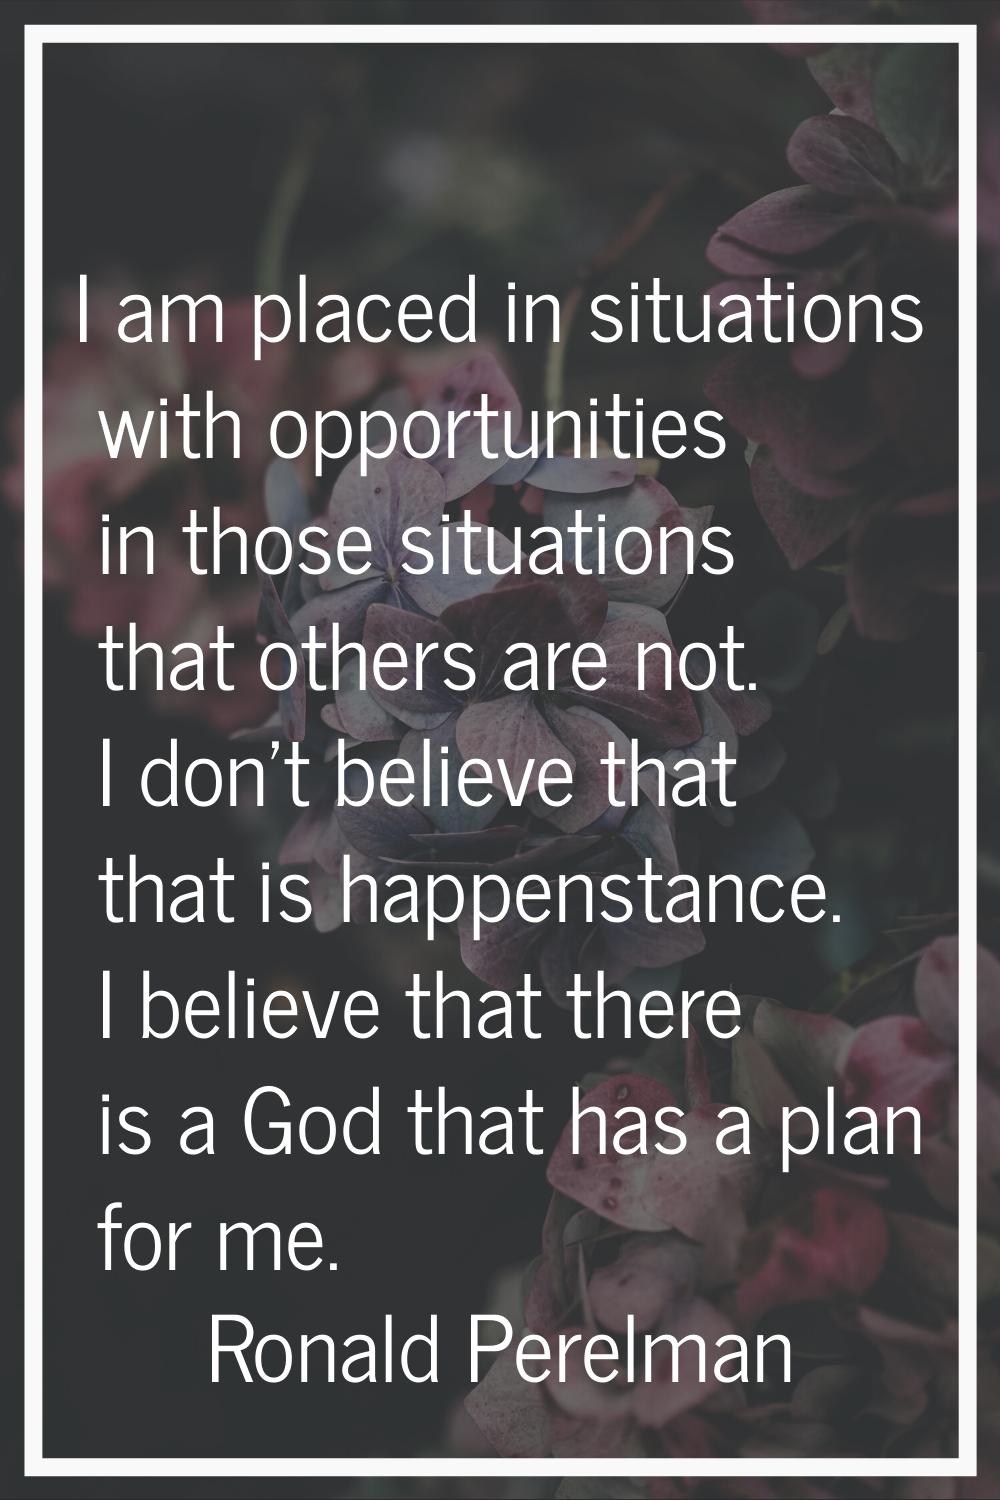 I am placed in situations with opportunities in those situations that others are not. I don't belie